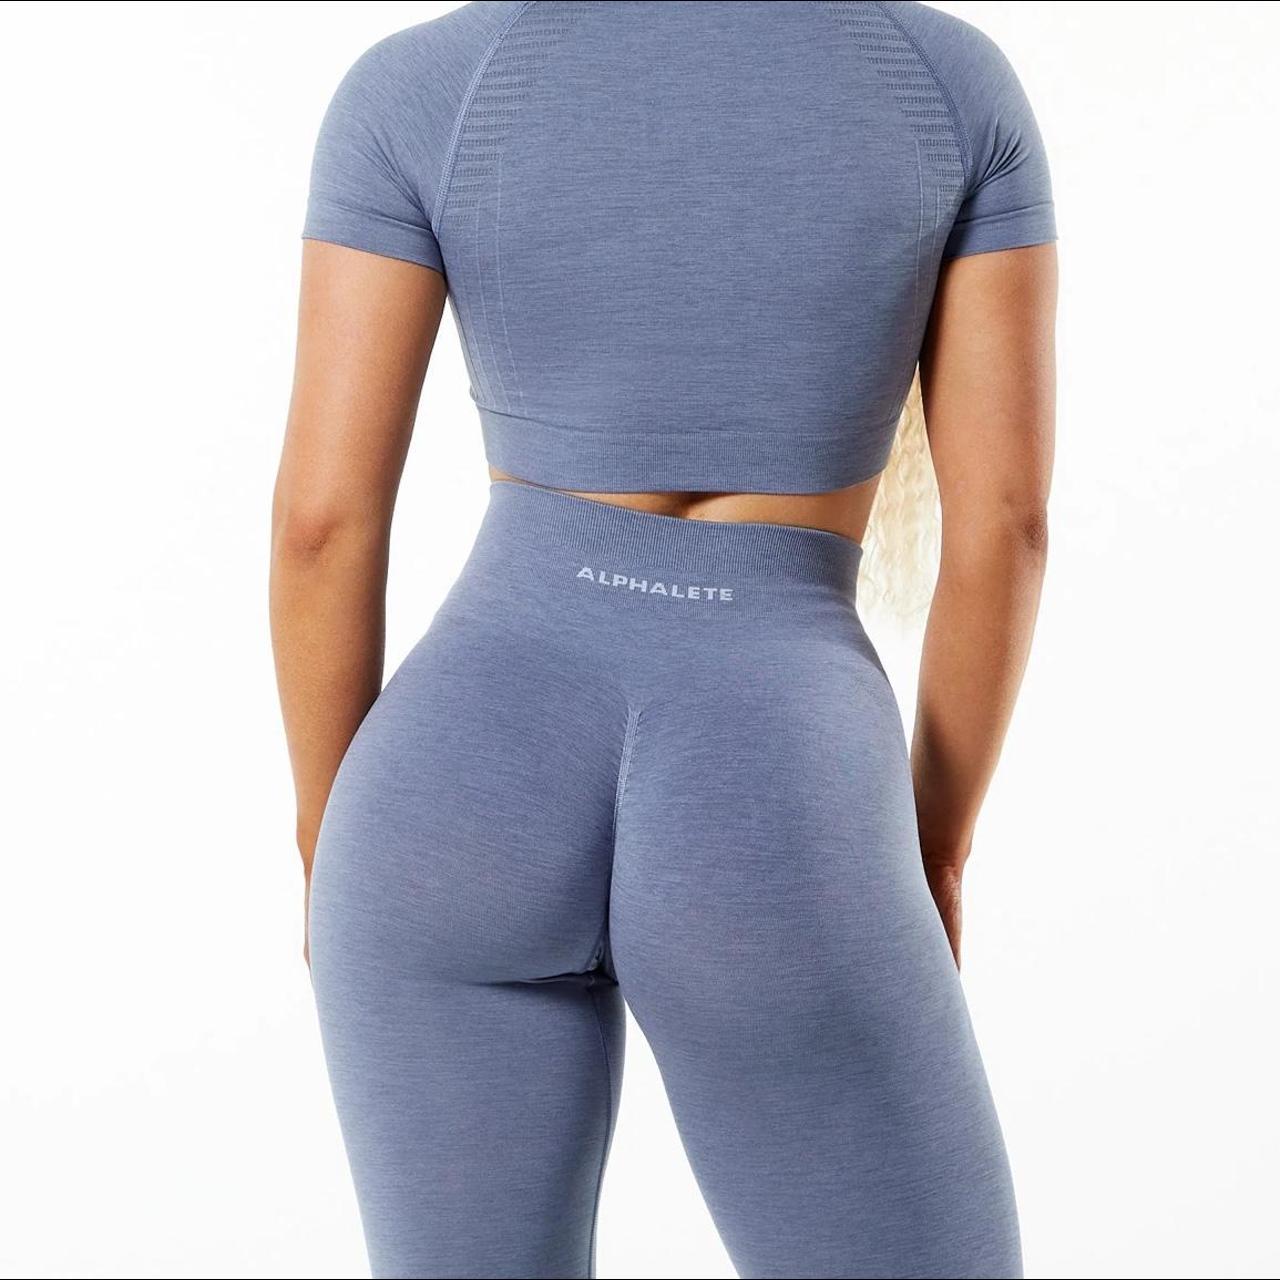 Alphalete amplify legging size small in the color - Depop